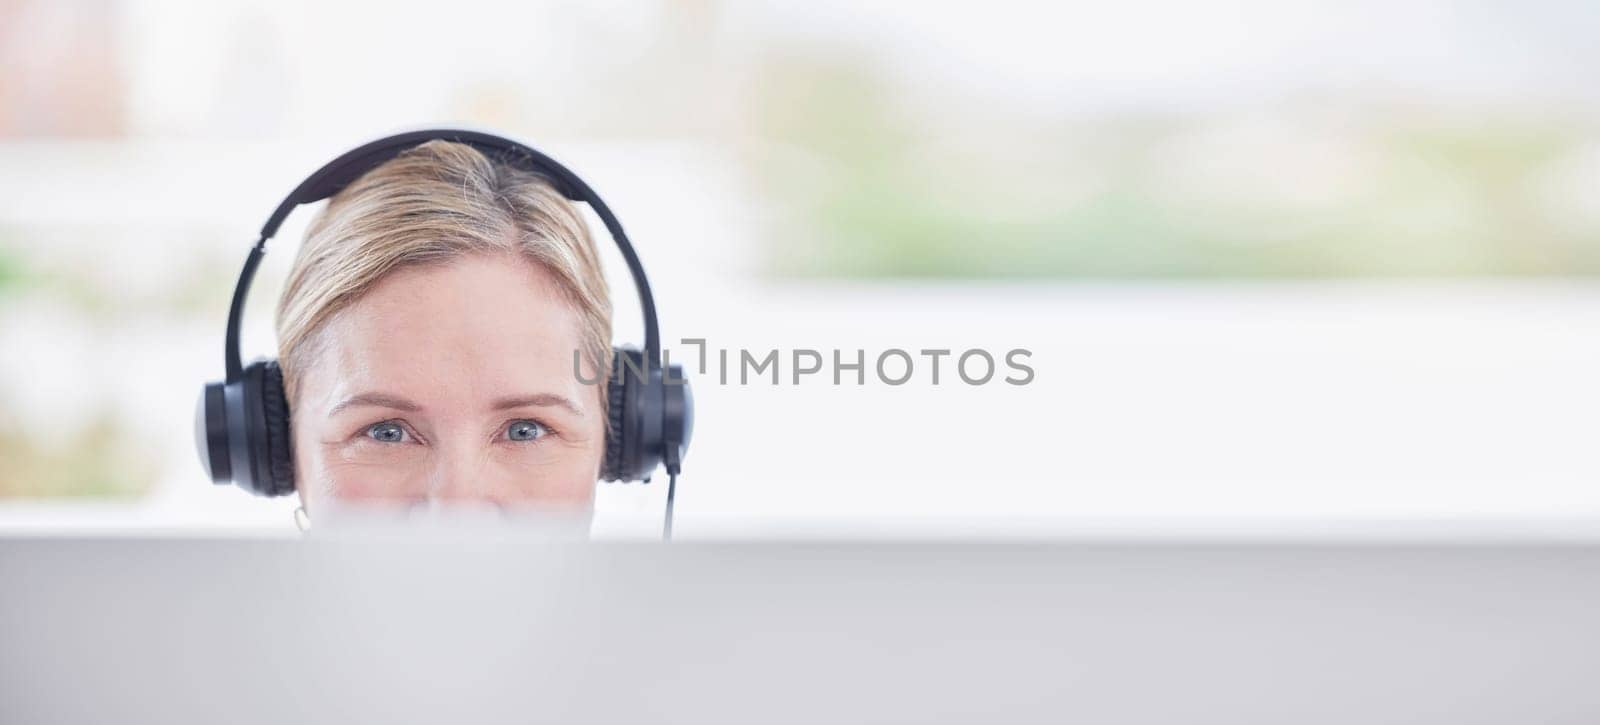 Call center portrait, woman on computer, consultant or agent in customer support, virtual communication and consulting service. Online advisor, telecom person or worker face in headset, pc and mockup.